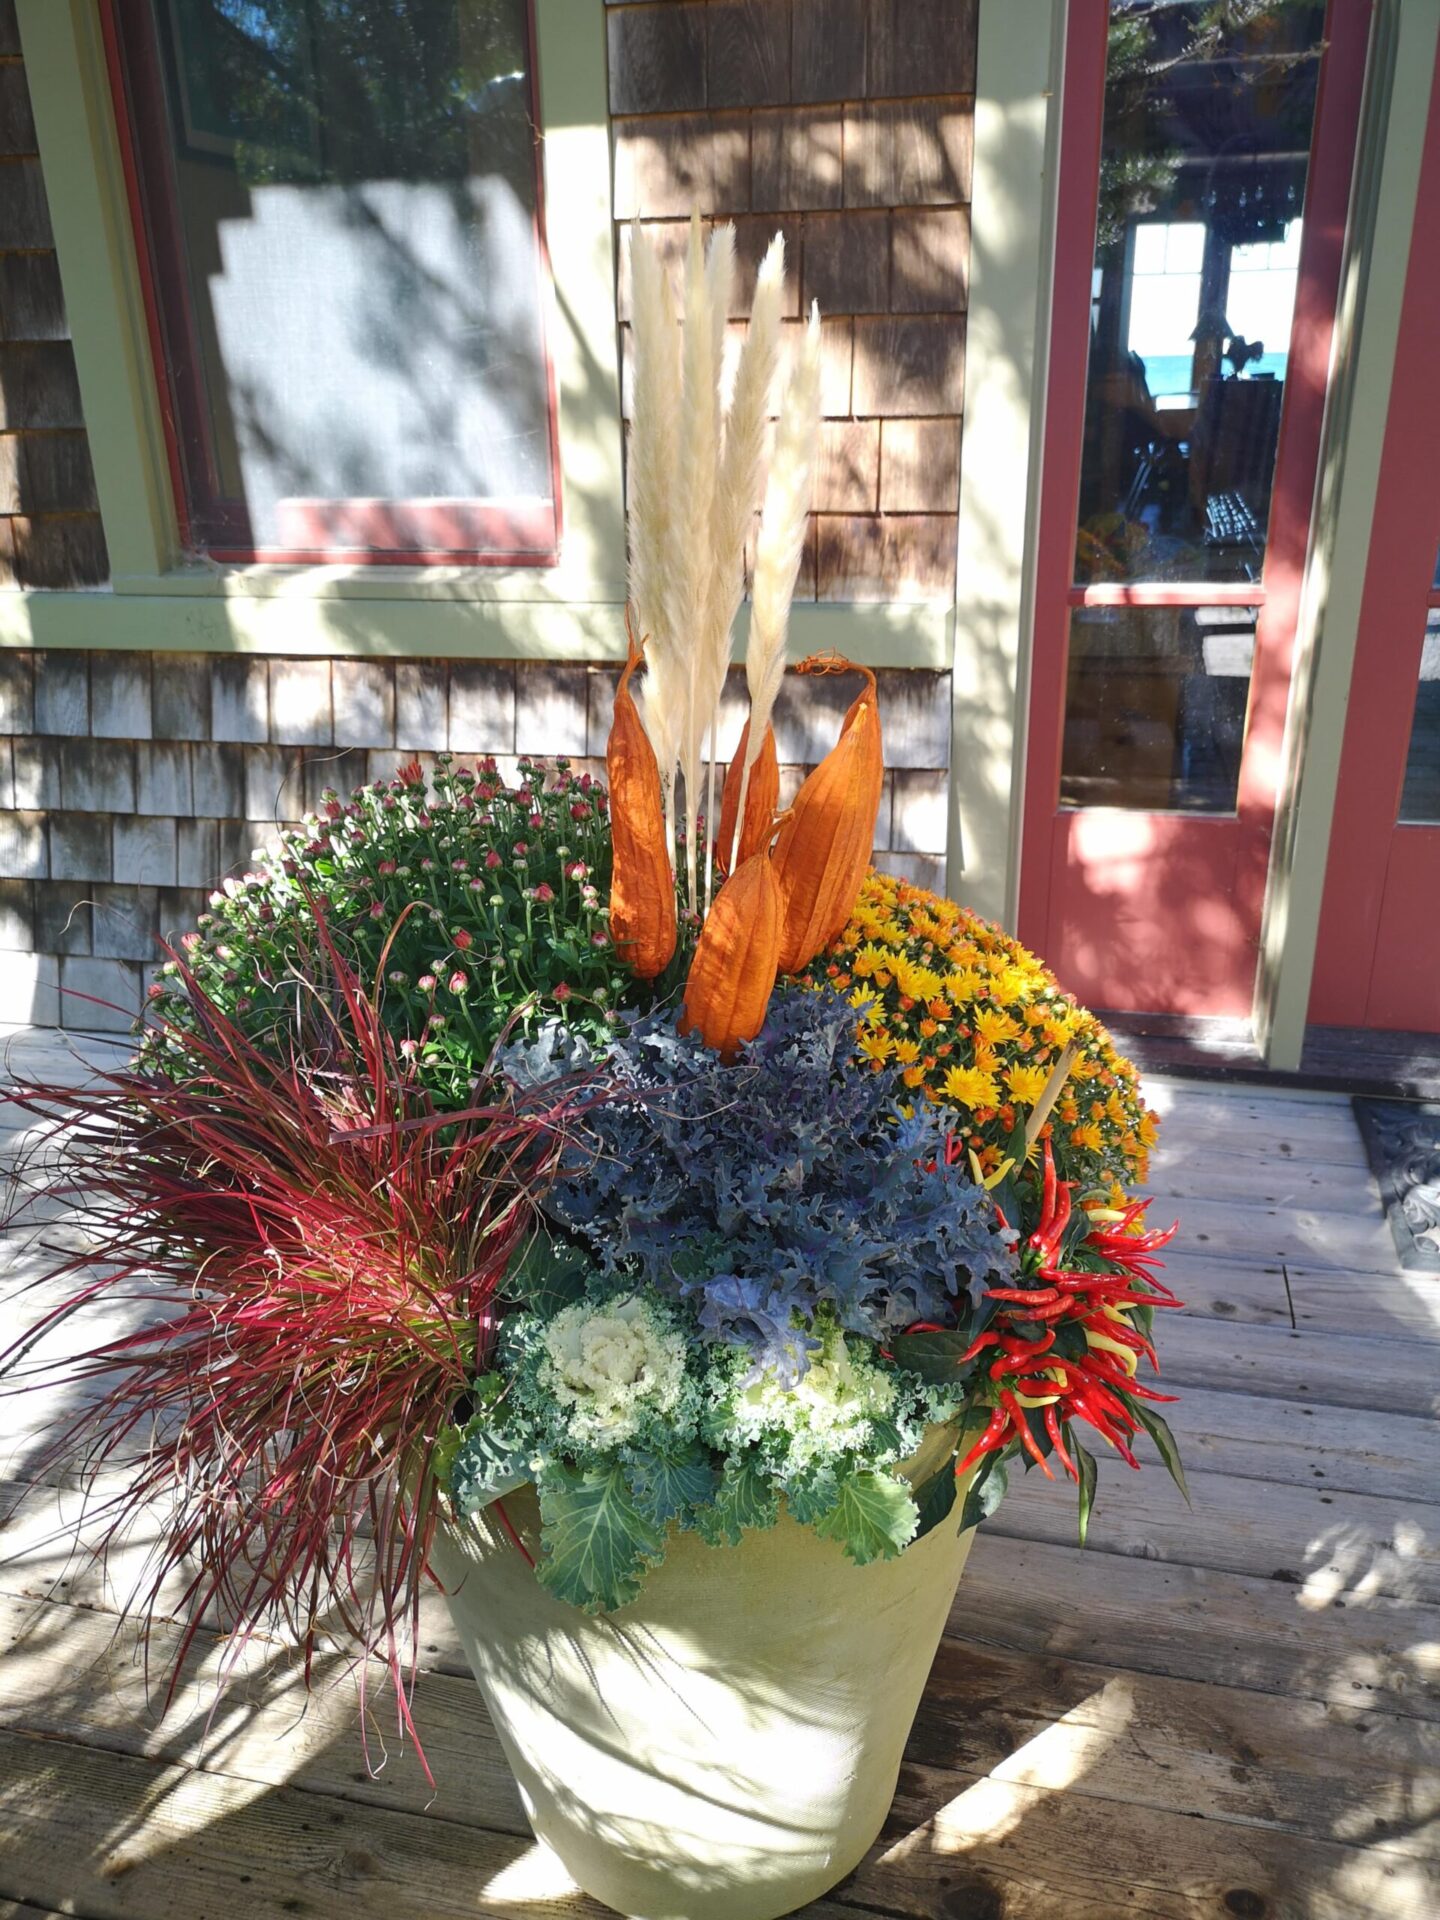 A vibrant decorative planter with various colorful plants and ornamental grasses on a wooden deck, against a house with cedar shingles and red trim.